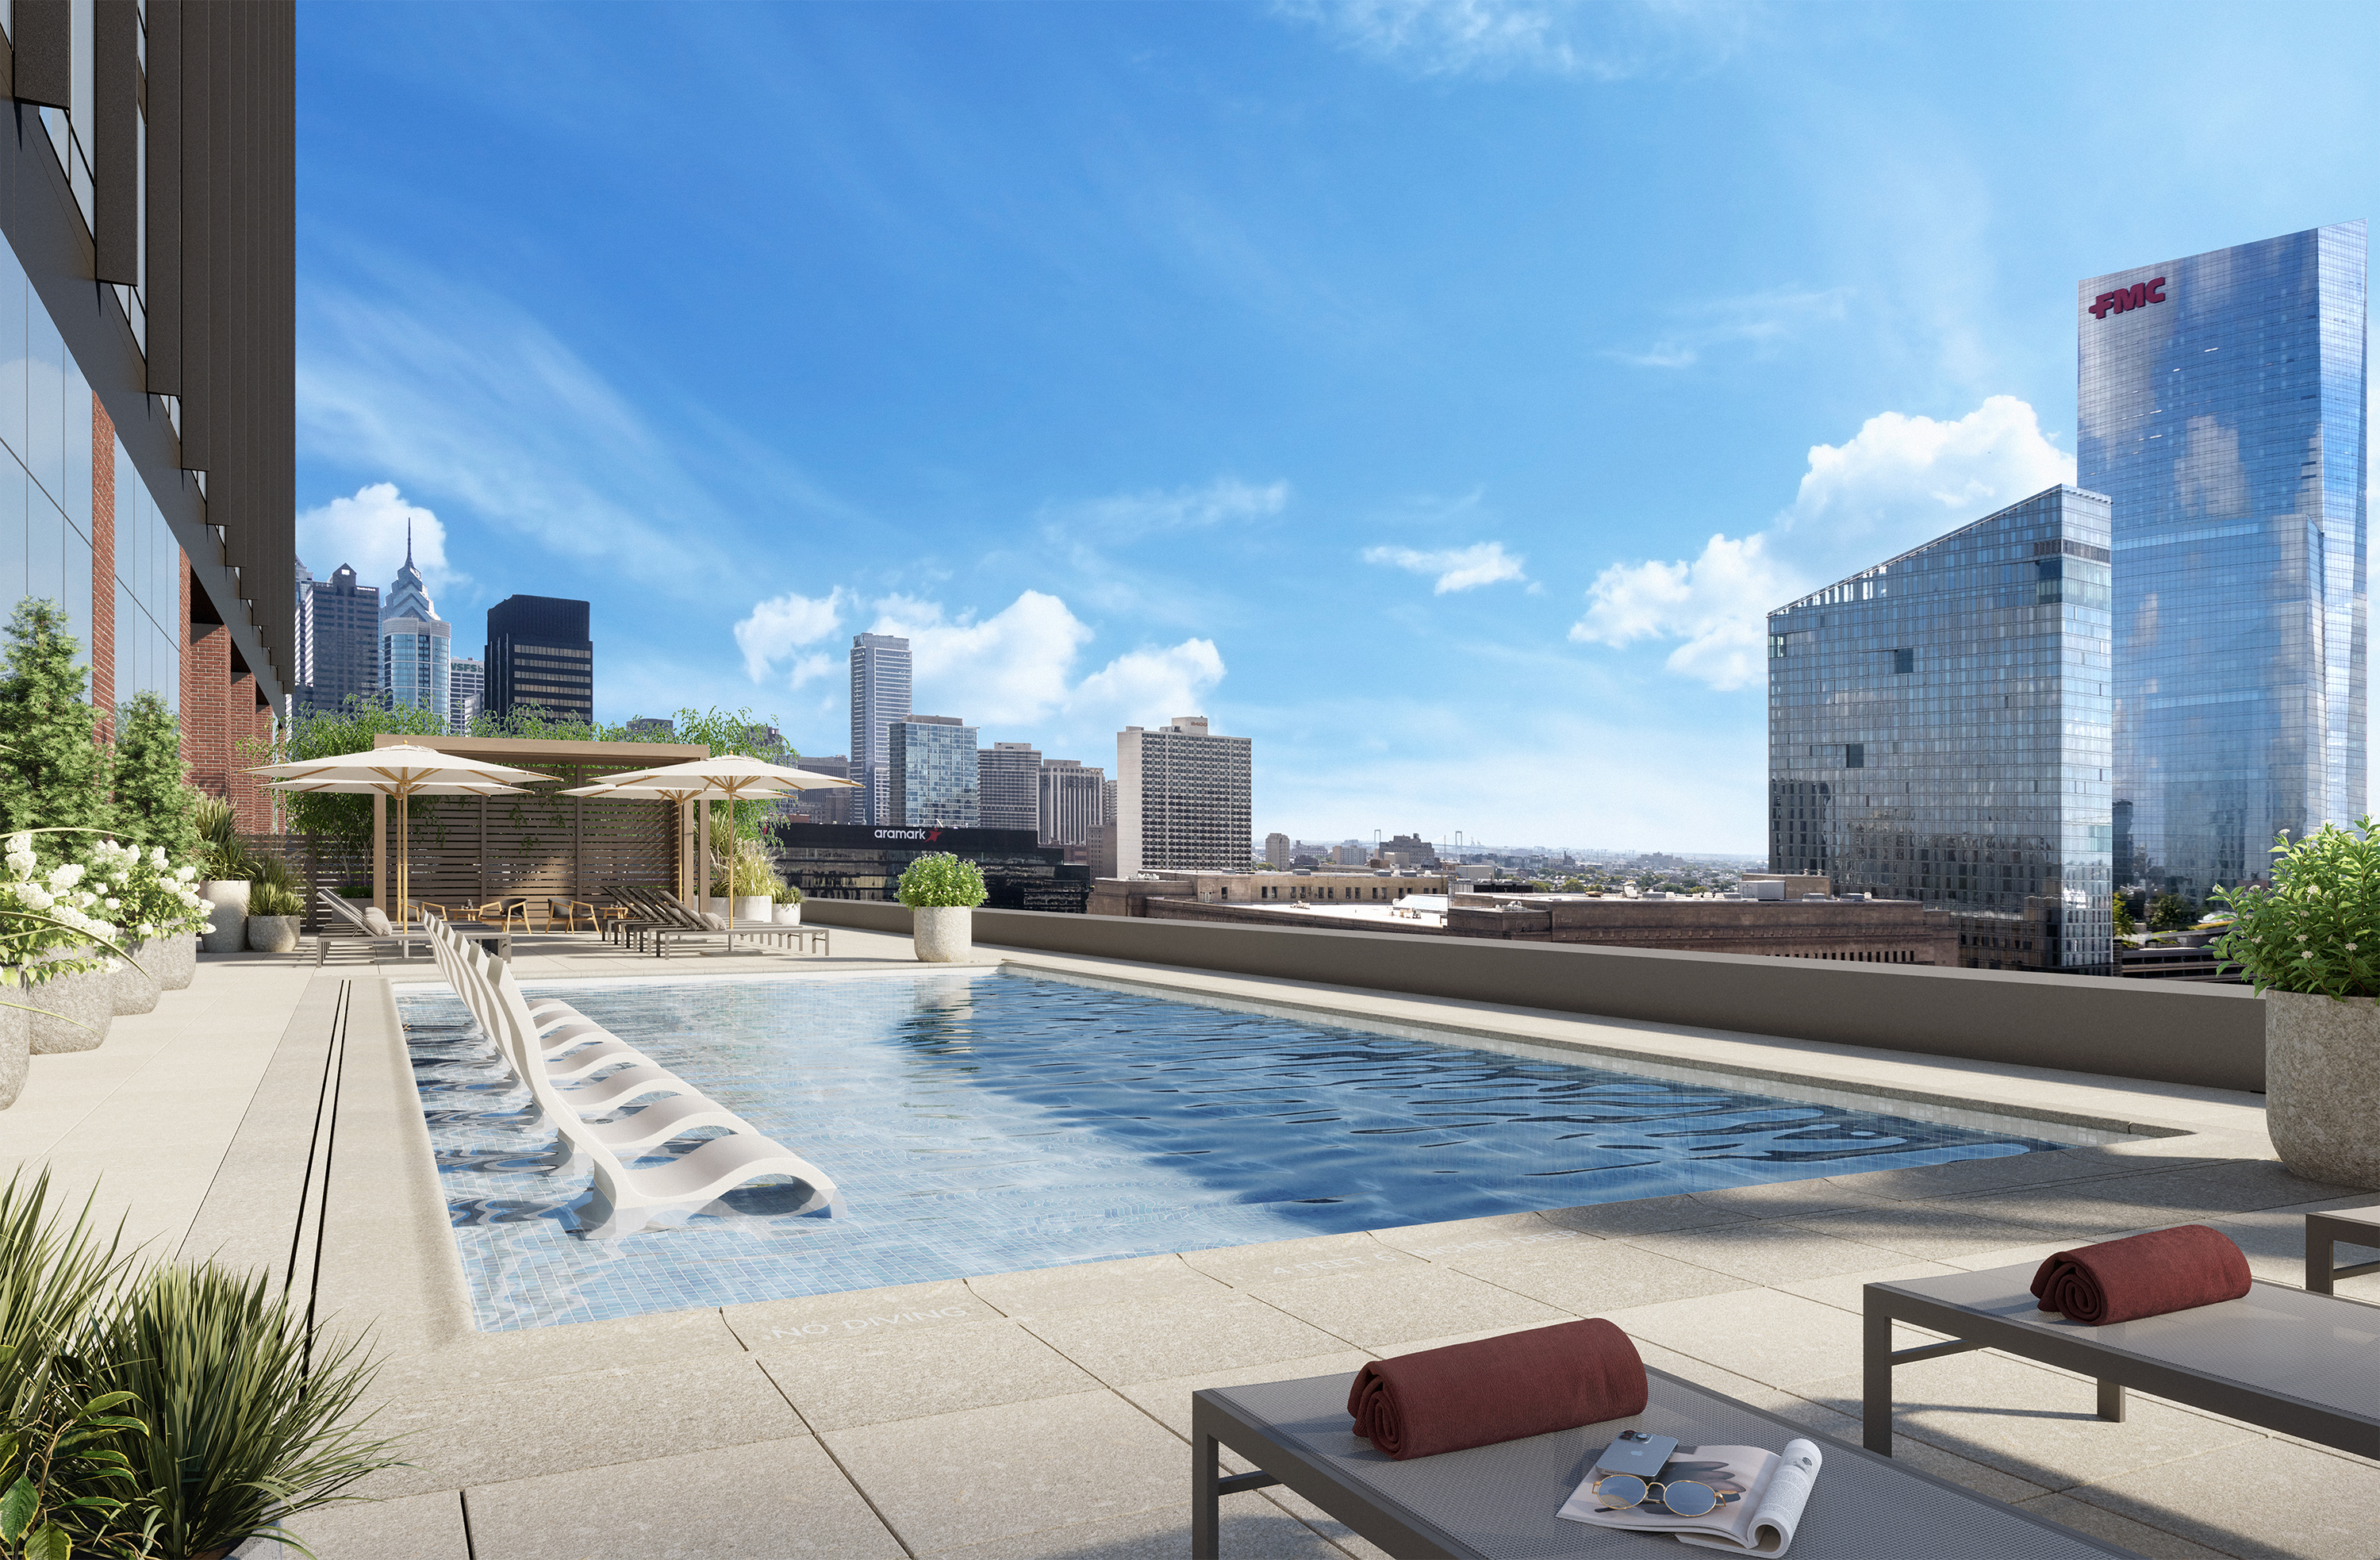 Brandywine Realty Trust & Gotham Organization Reveal First Look at New Residential Project, Avira, in Schuylkill Yards